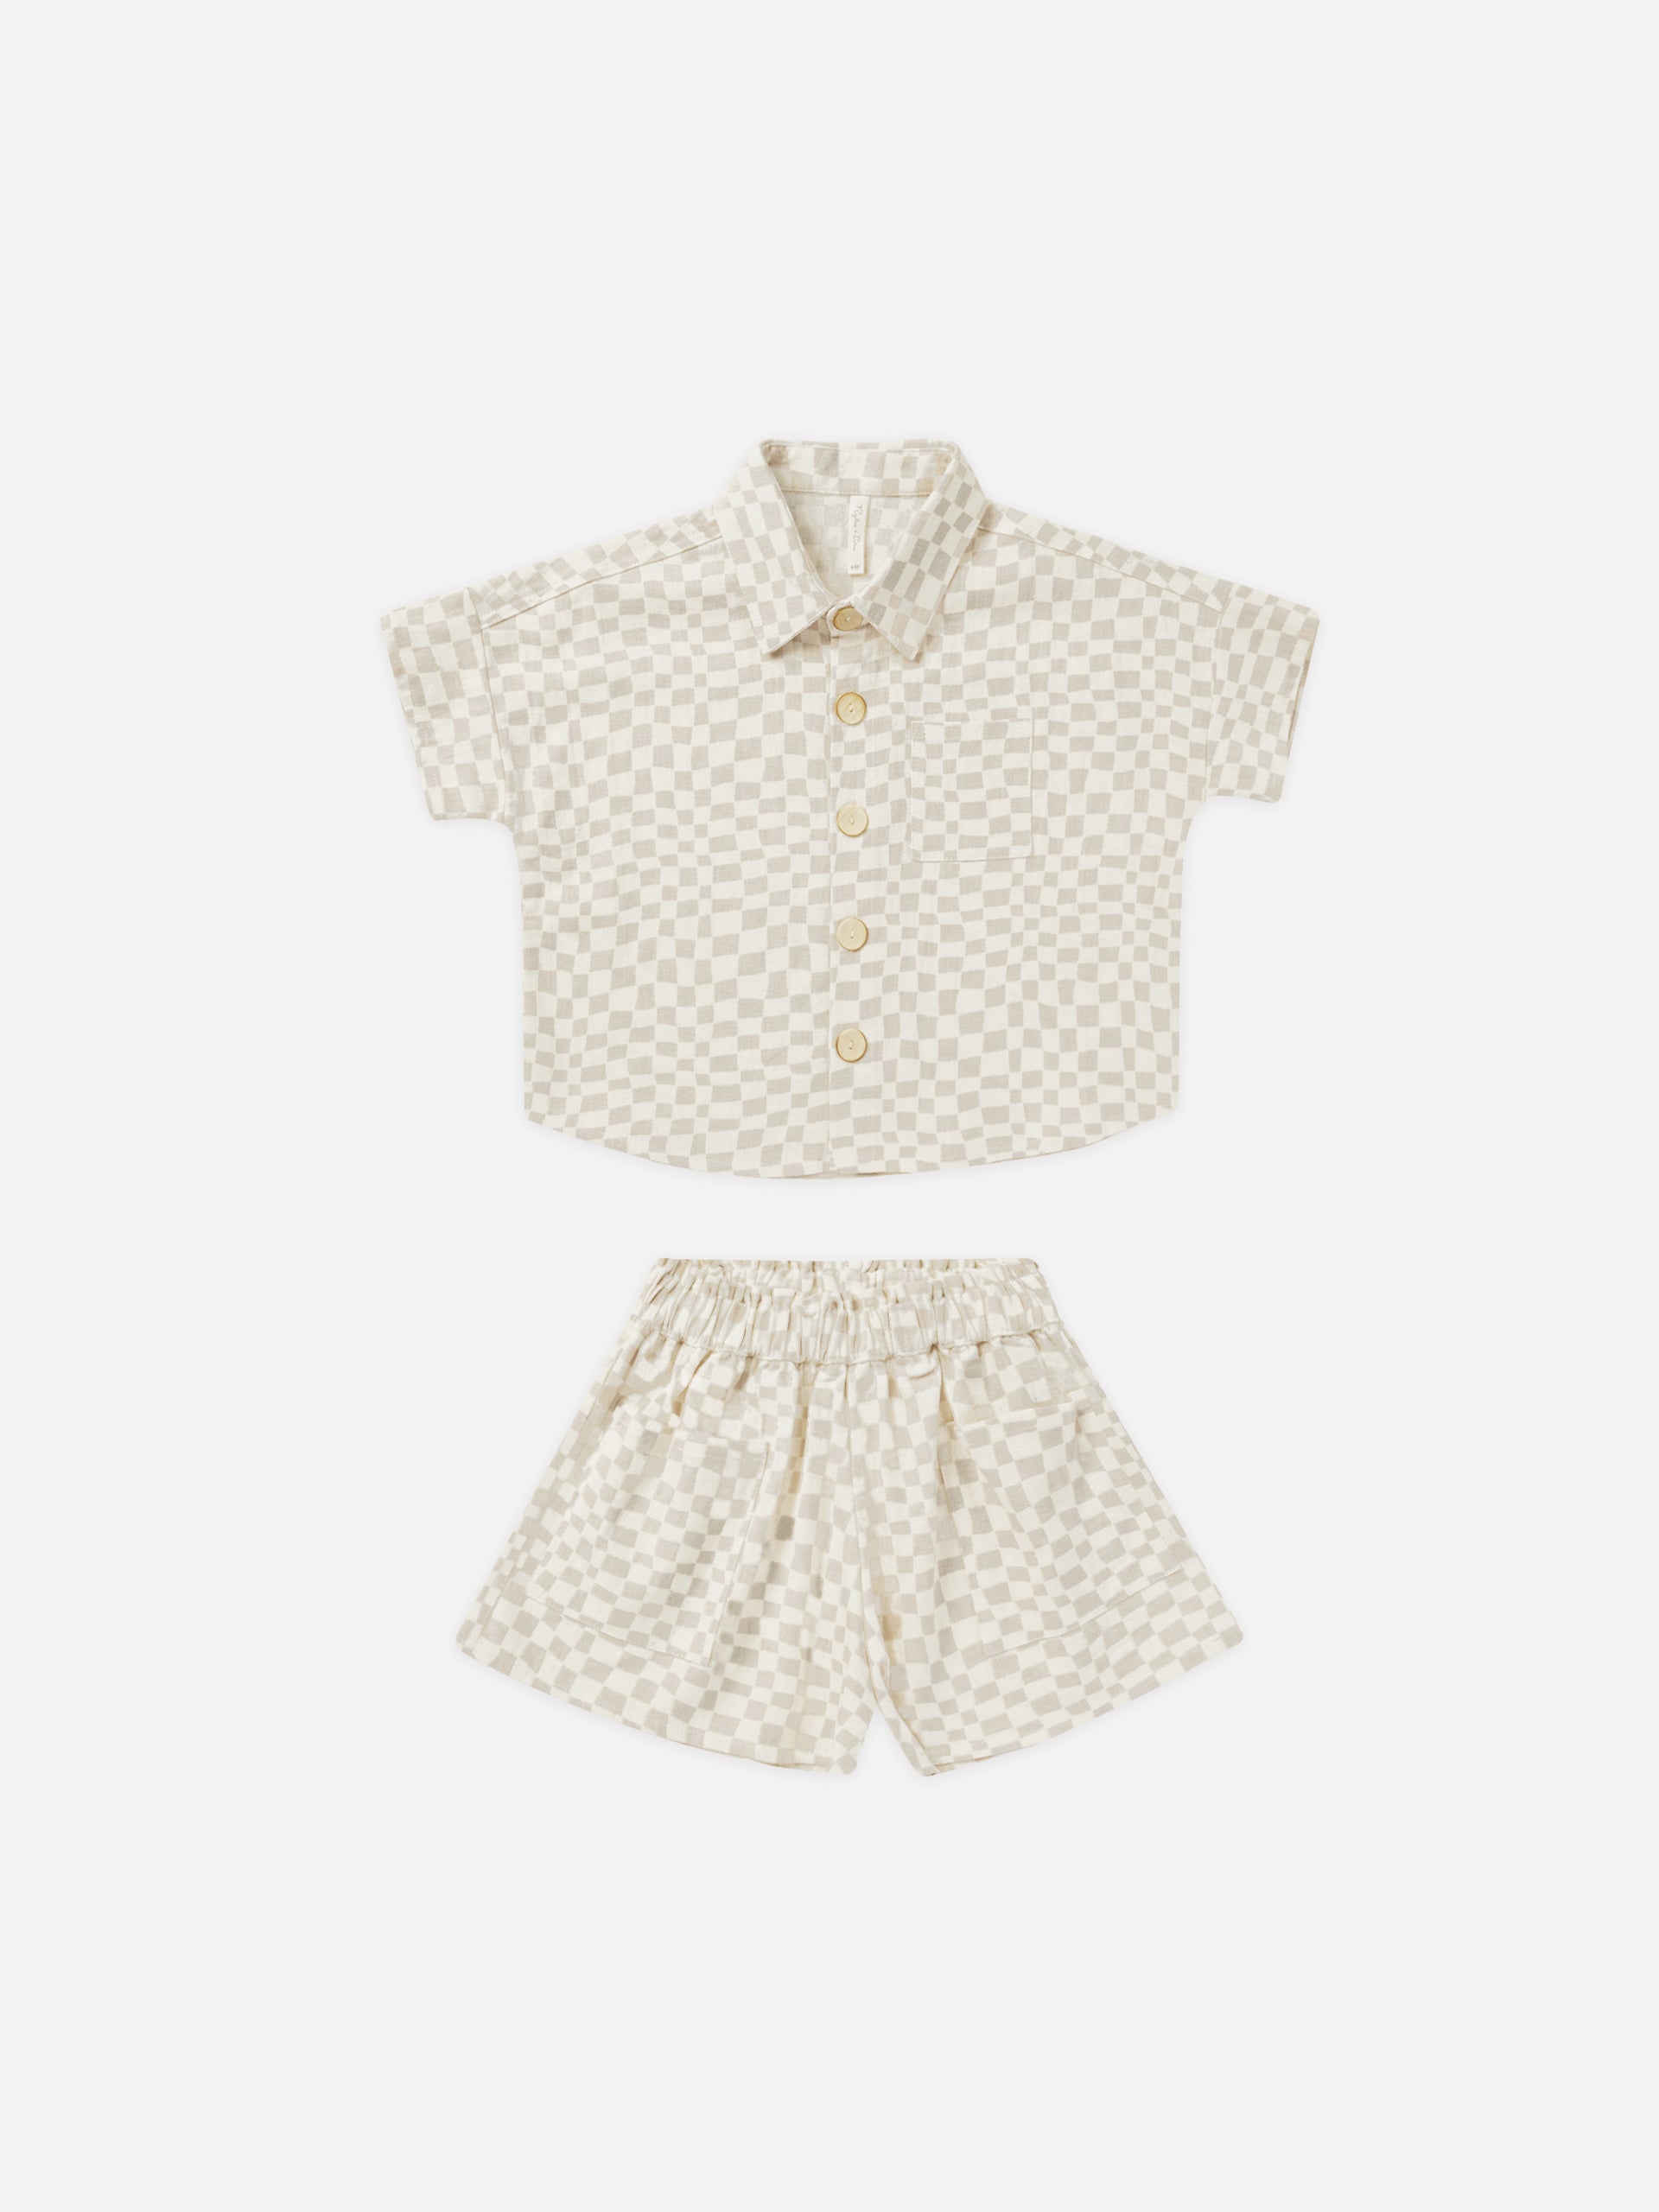 Kelli Set || Dove Check - Rylee + Cru | Kids Clothes | Trendy Baby Clothes | Modern Infant Outfits |